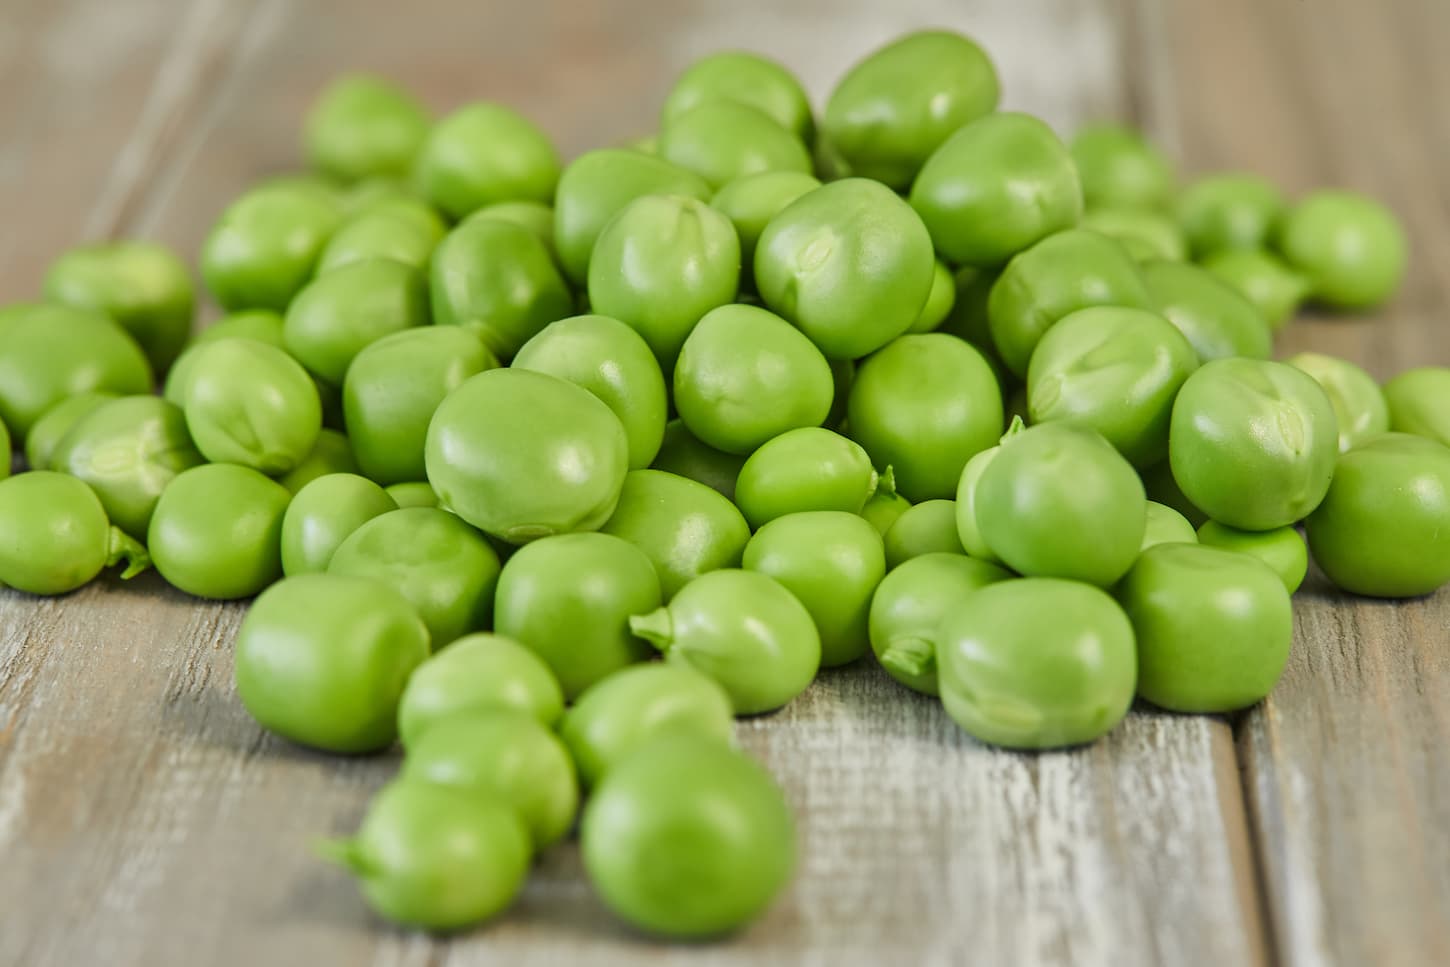 Why Are Peas Green? Are There Other Colors?